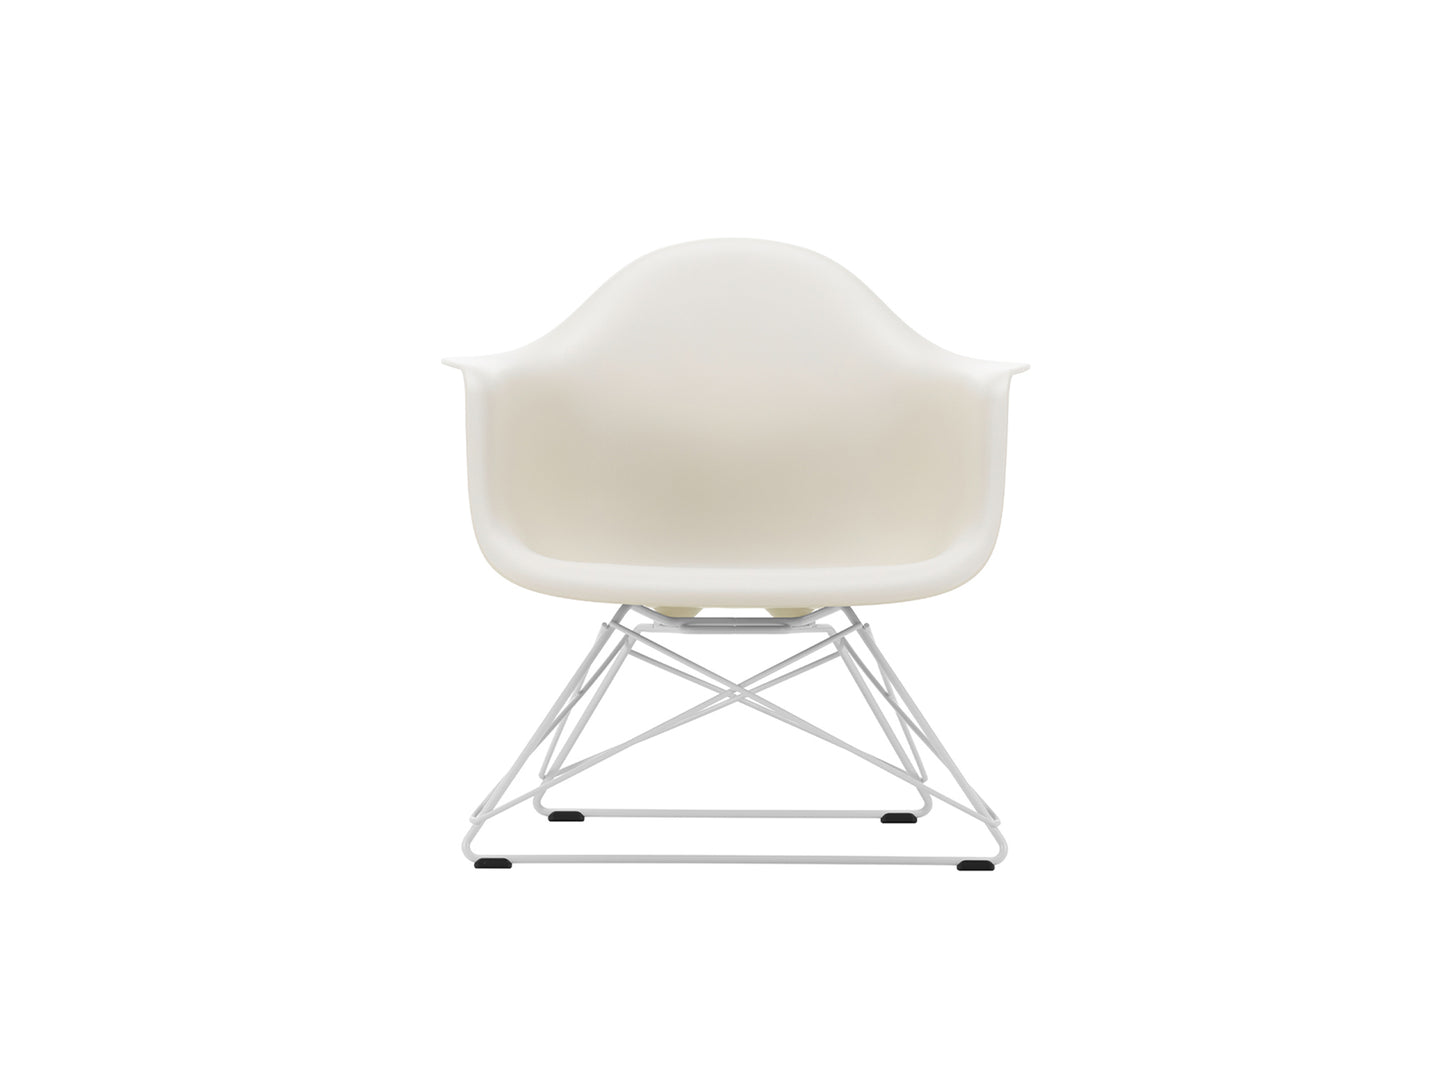 Eames Plastic Armchair LAR by Vitra - Pebble 11 Shell / White Powder-Coated Steel